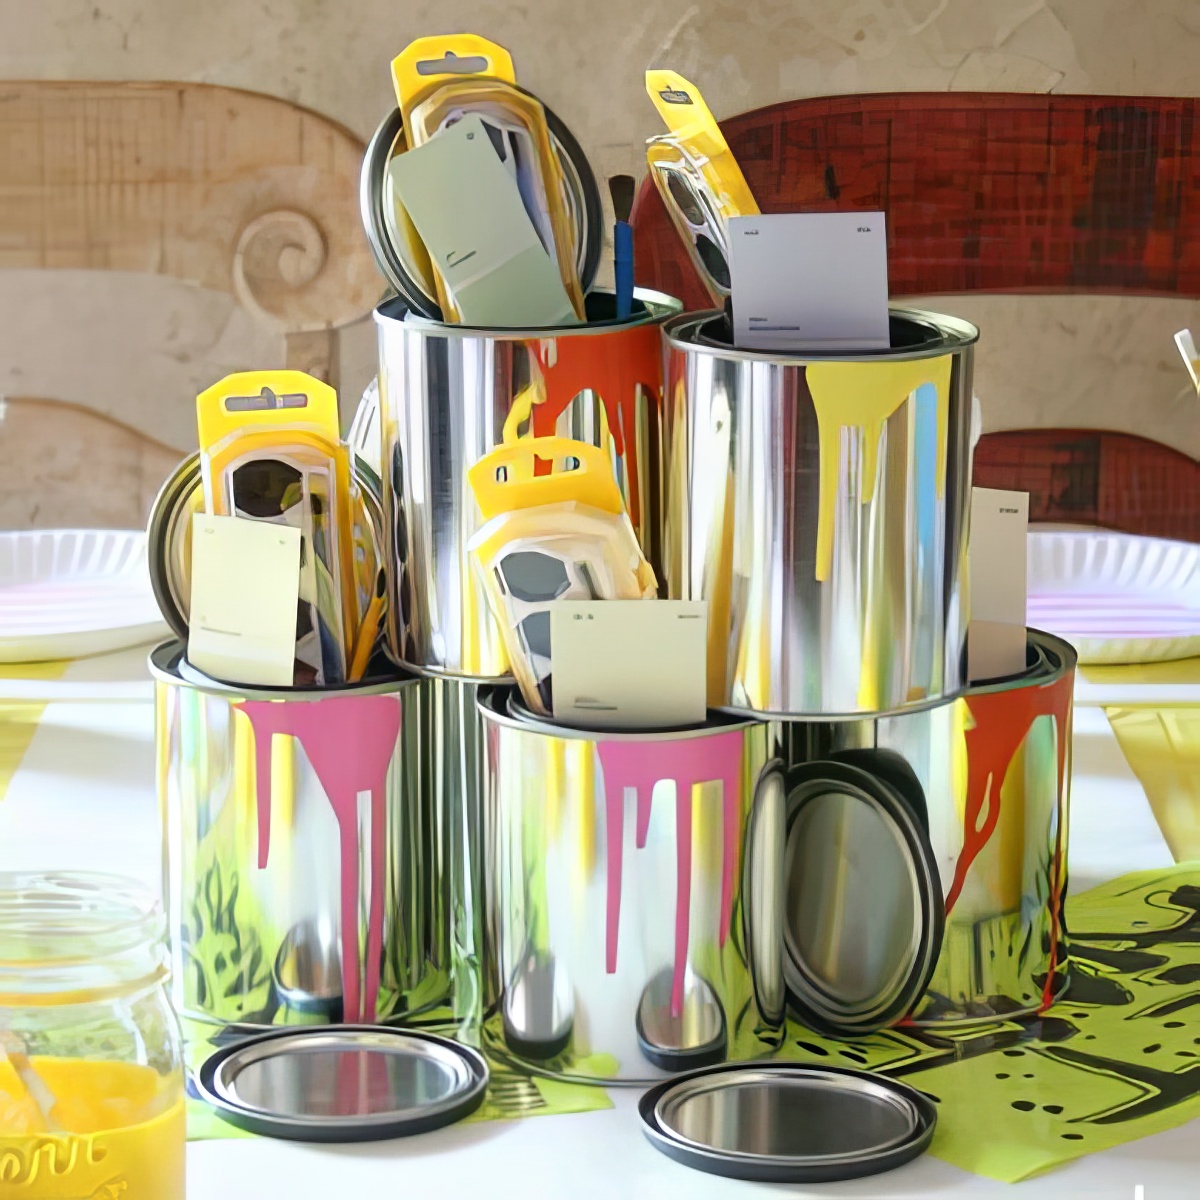 Turn this empty cans into party kit containers for a fun party night!